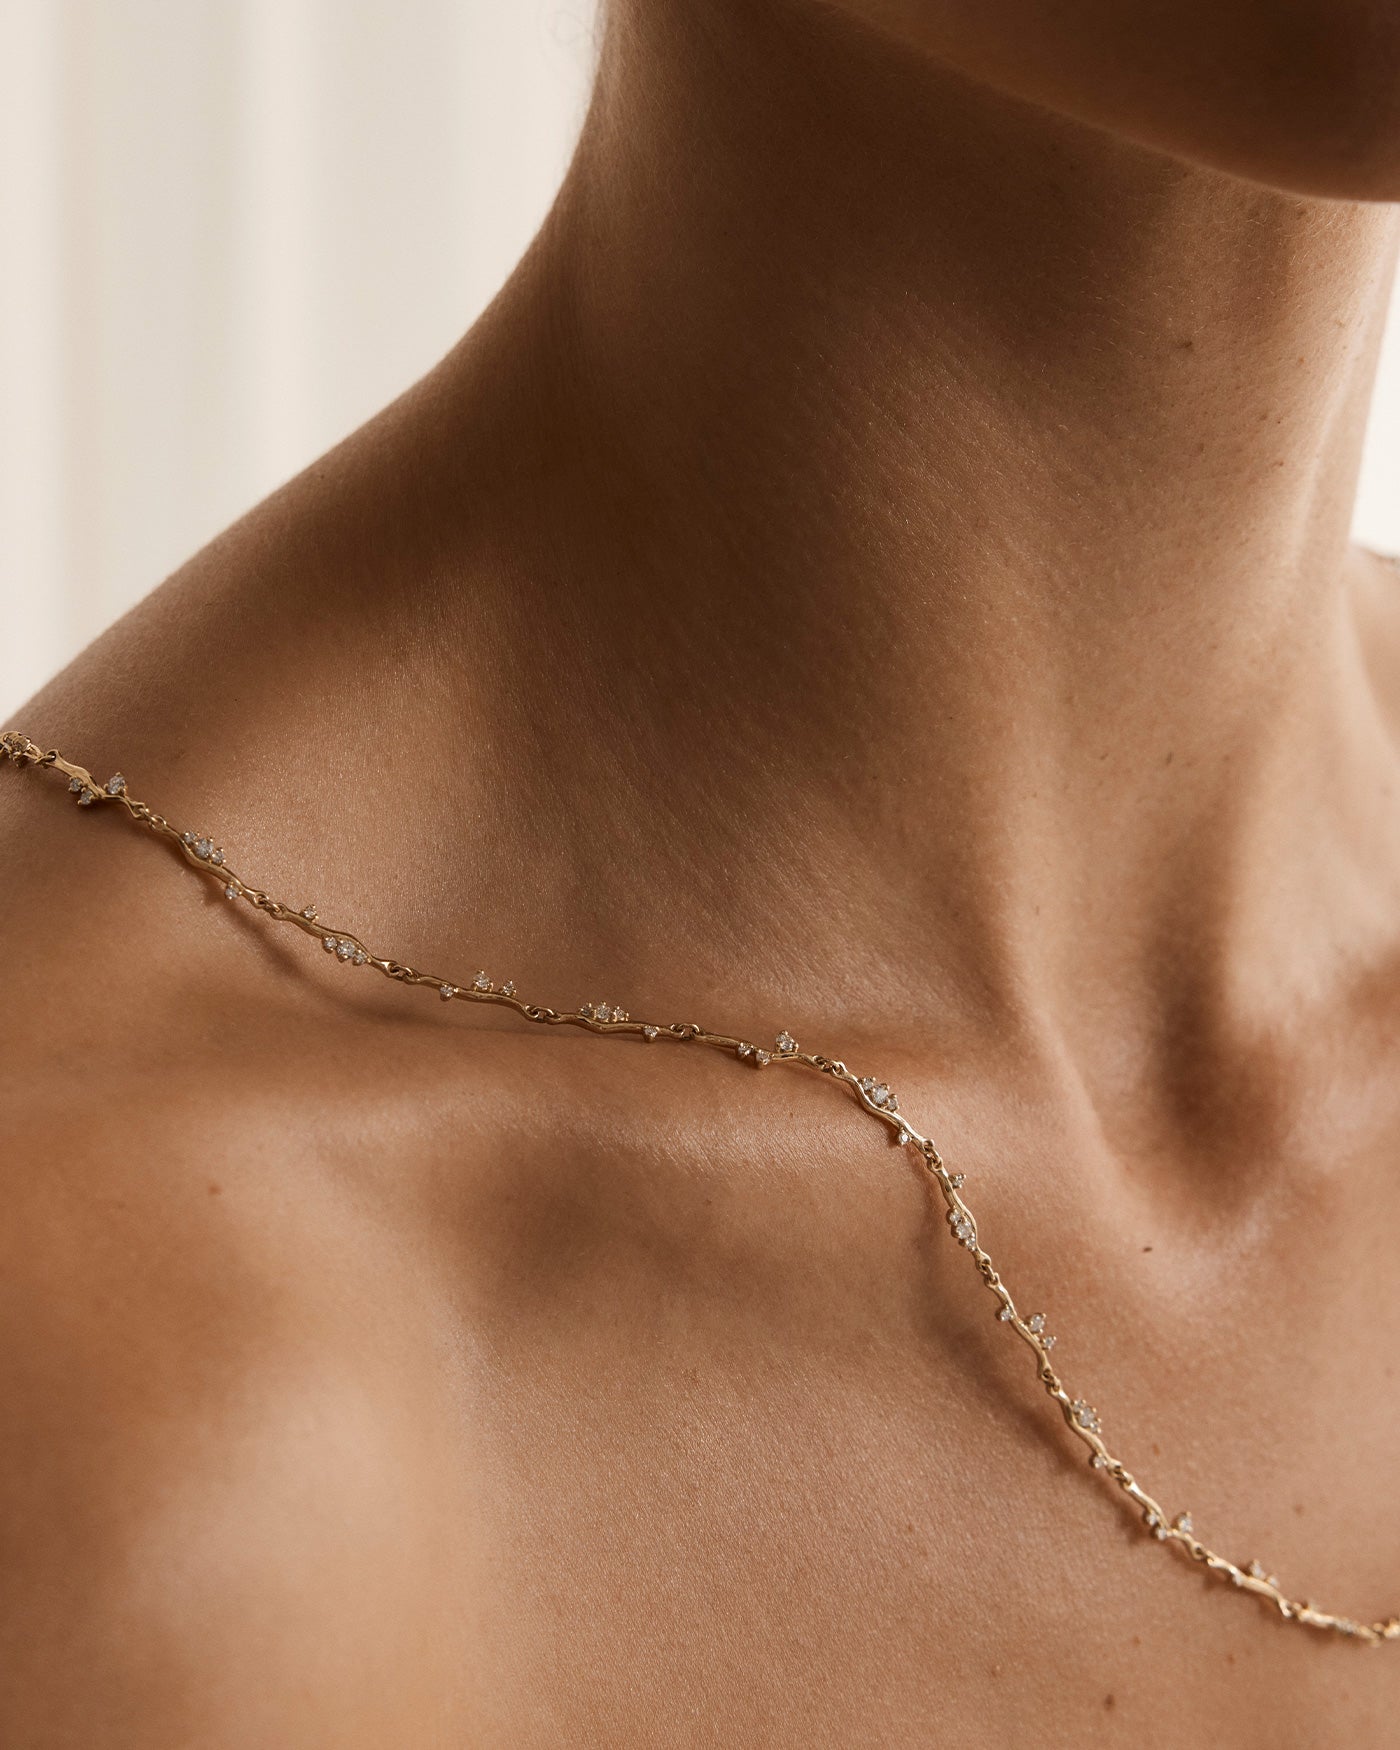 Model image of the ember diamond necklace being worn